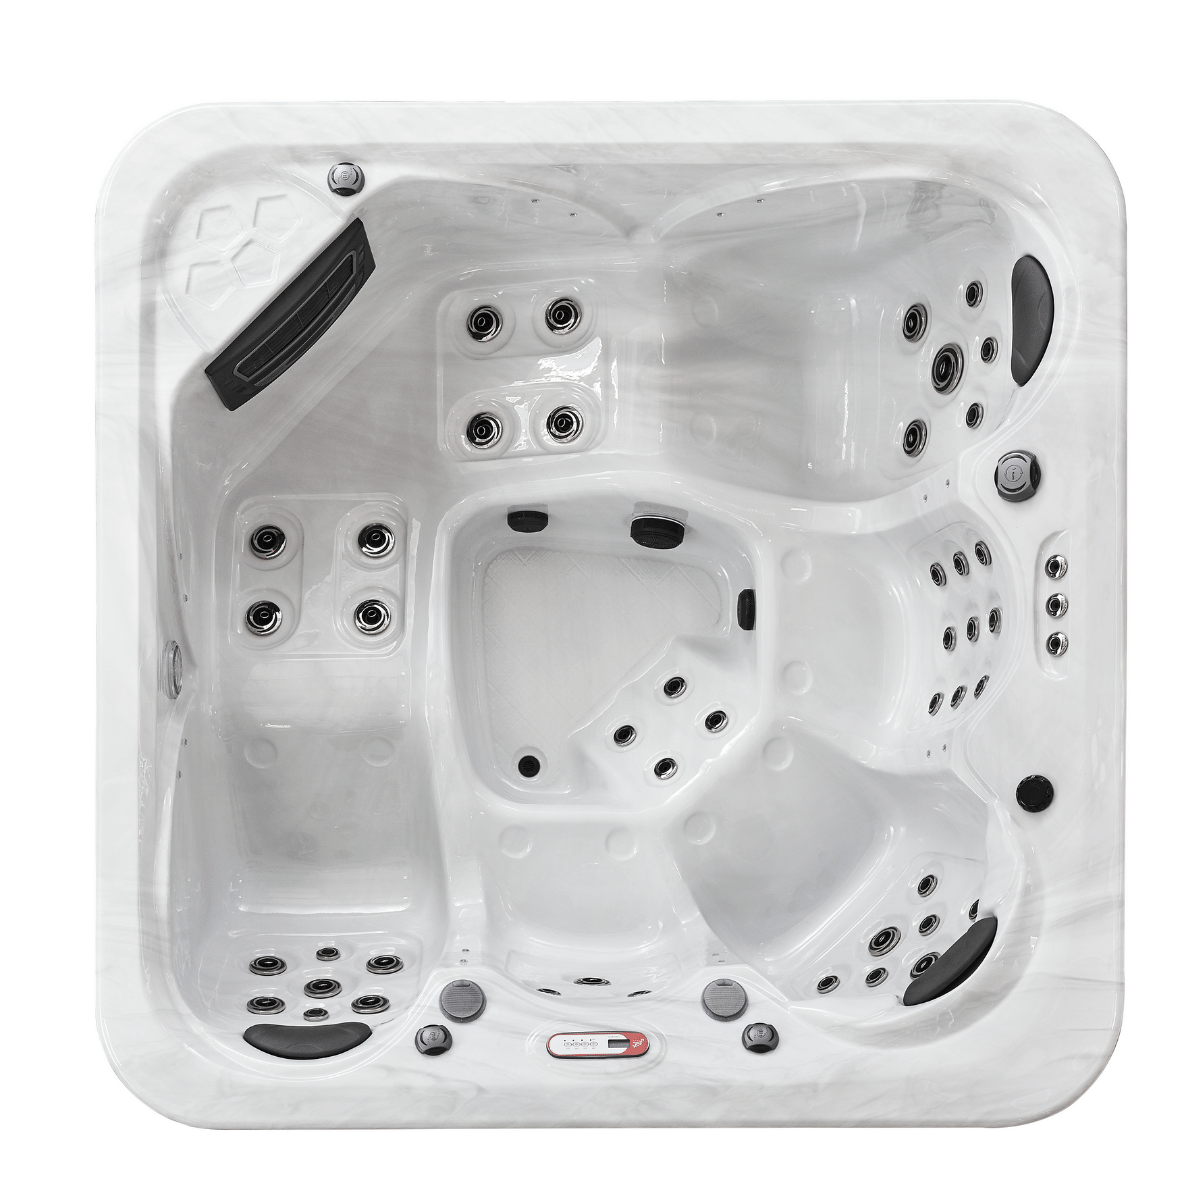 The Beacon 5 Seat Hot Tub by Just Hot Tubs